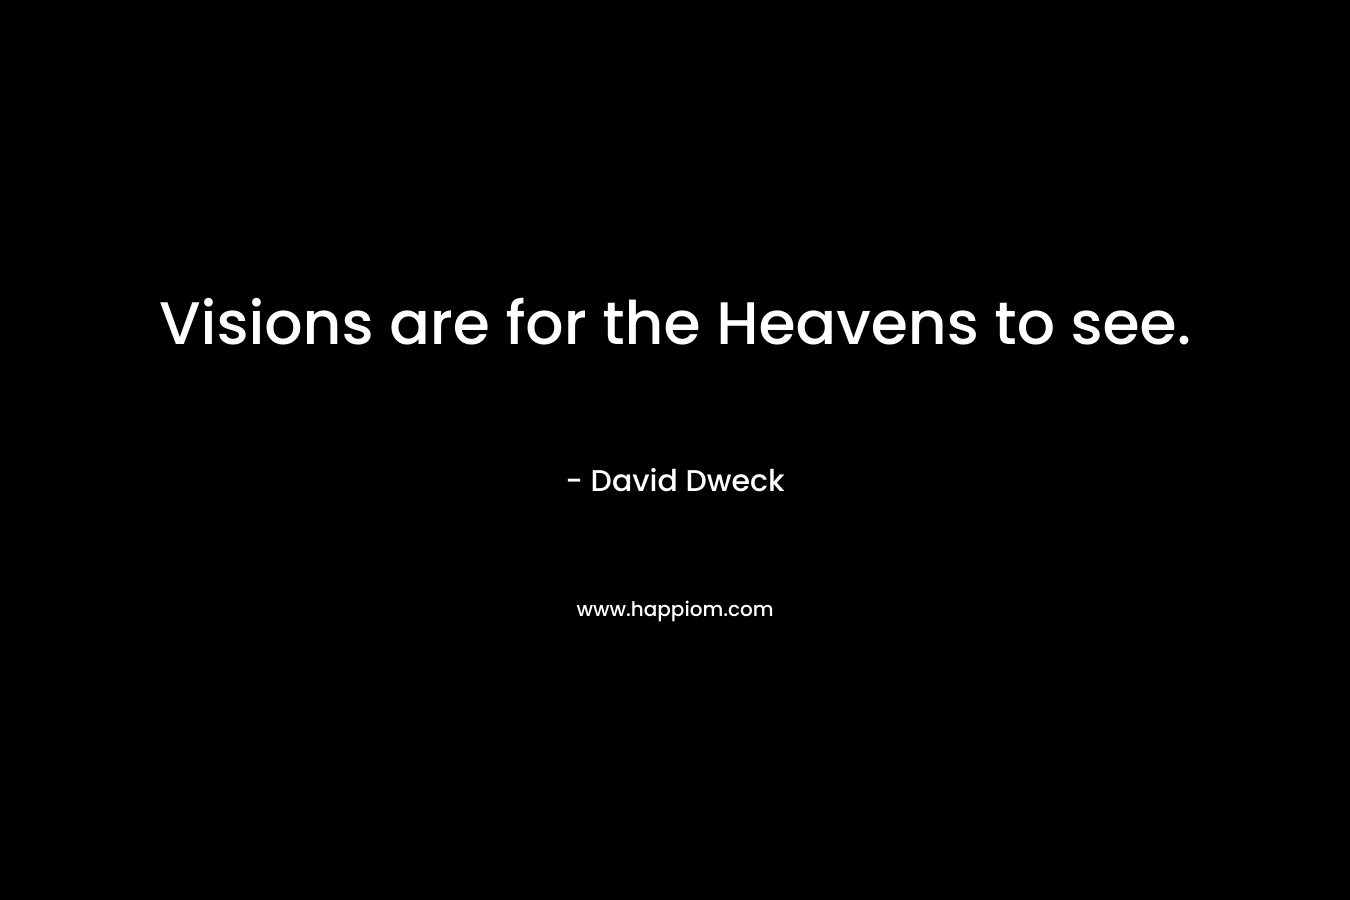 Visions are for the Heavens to see. – David Dweck